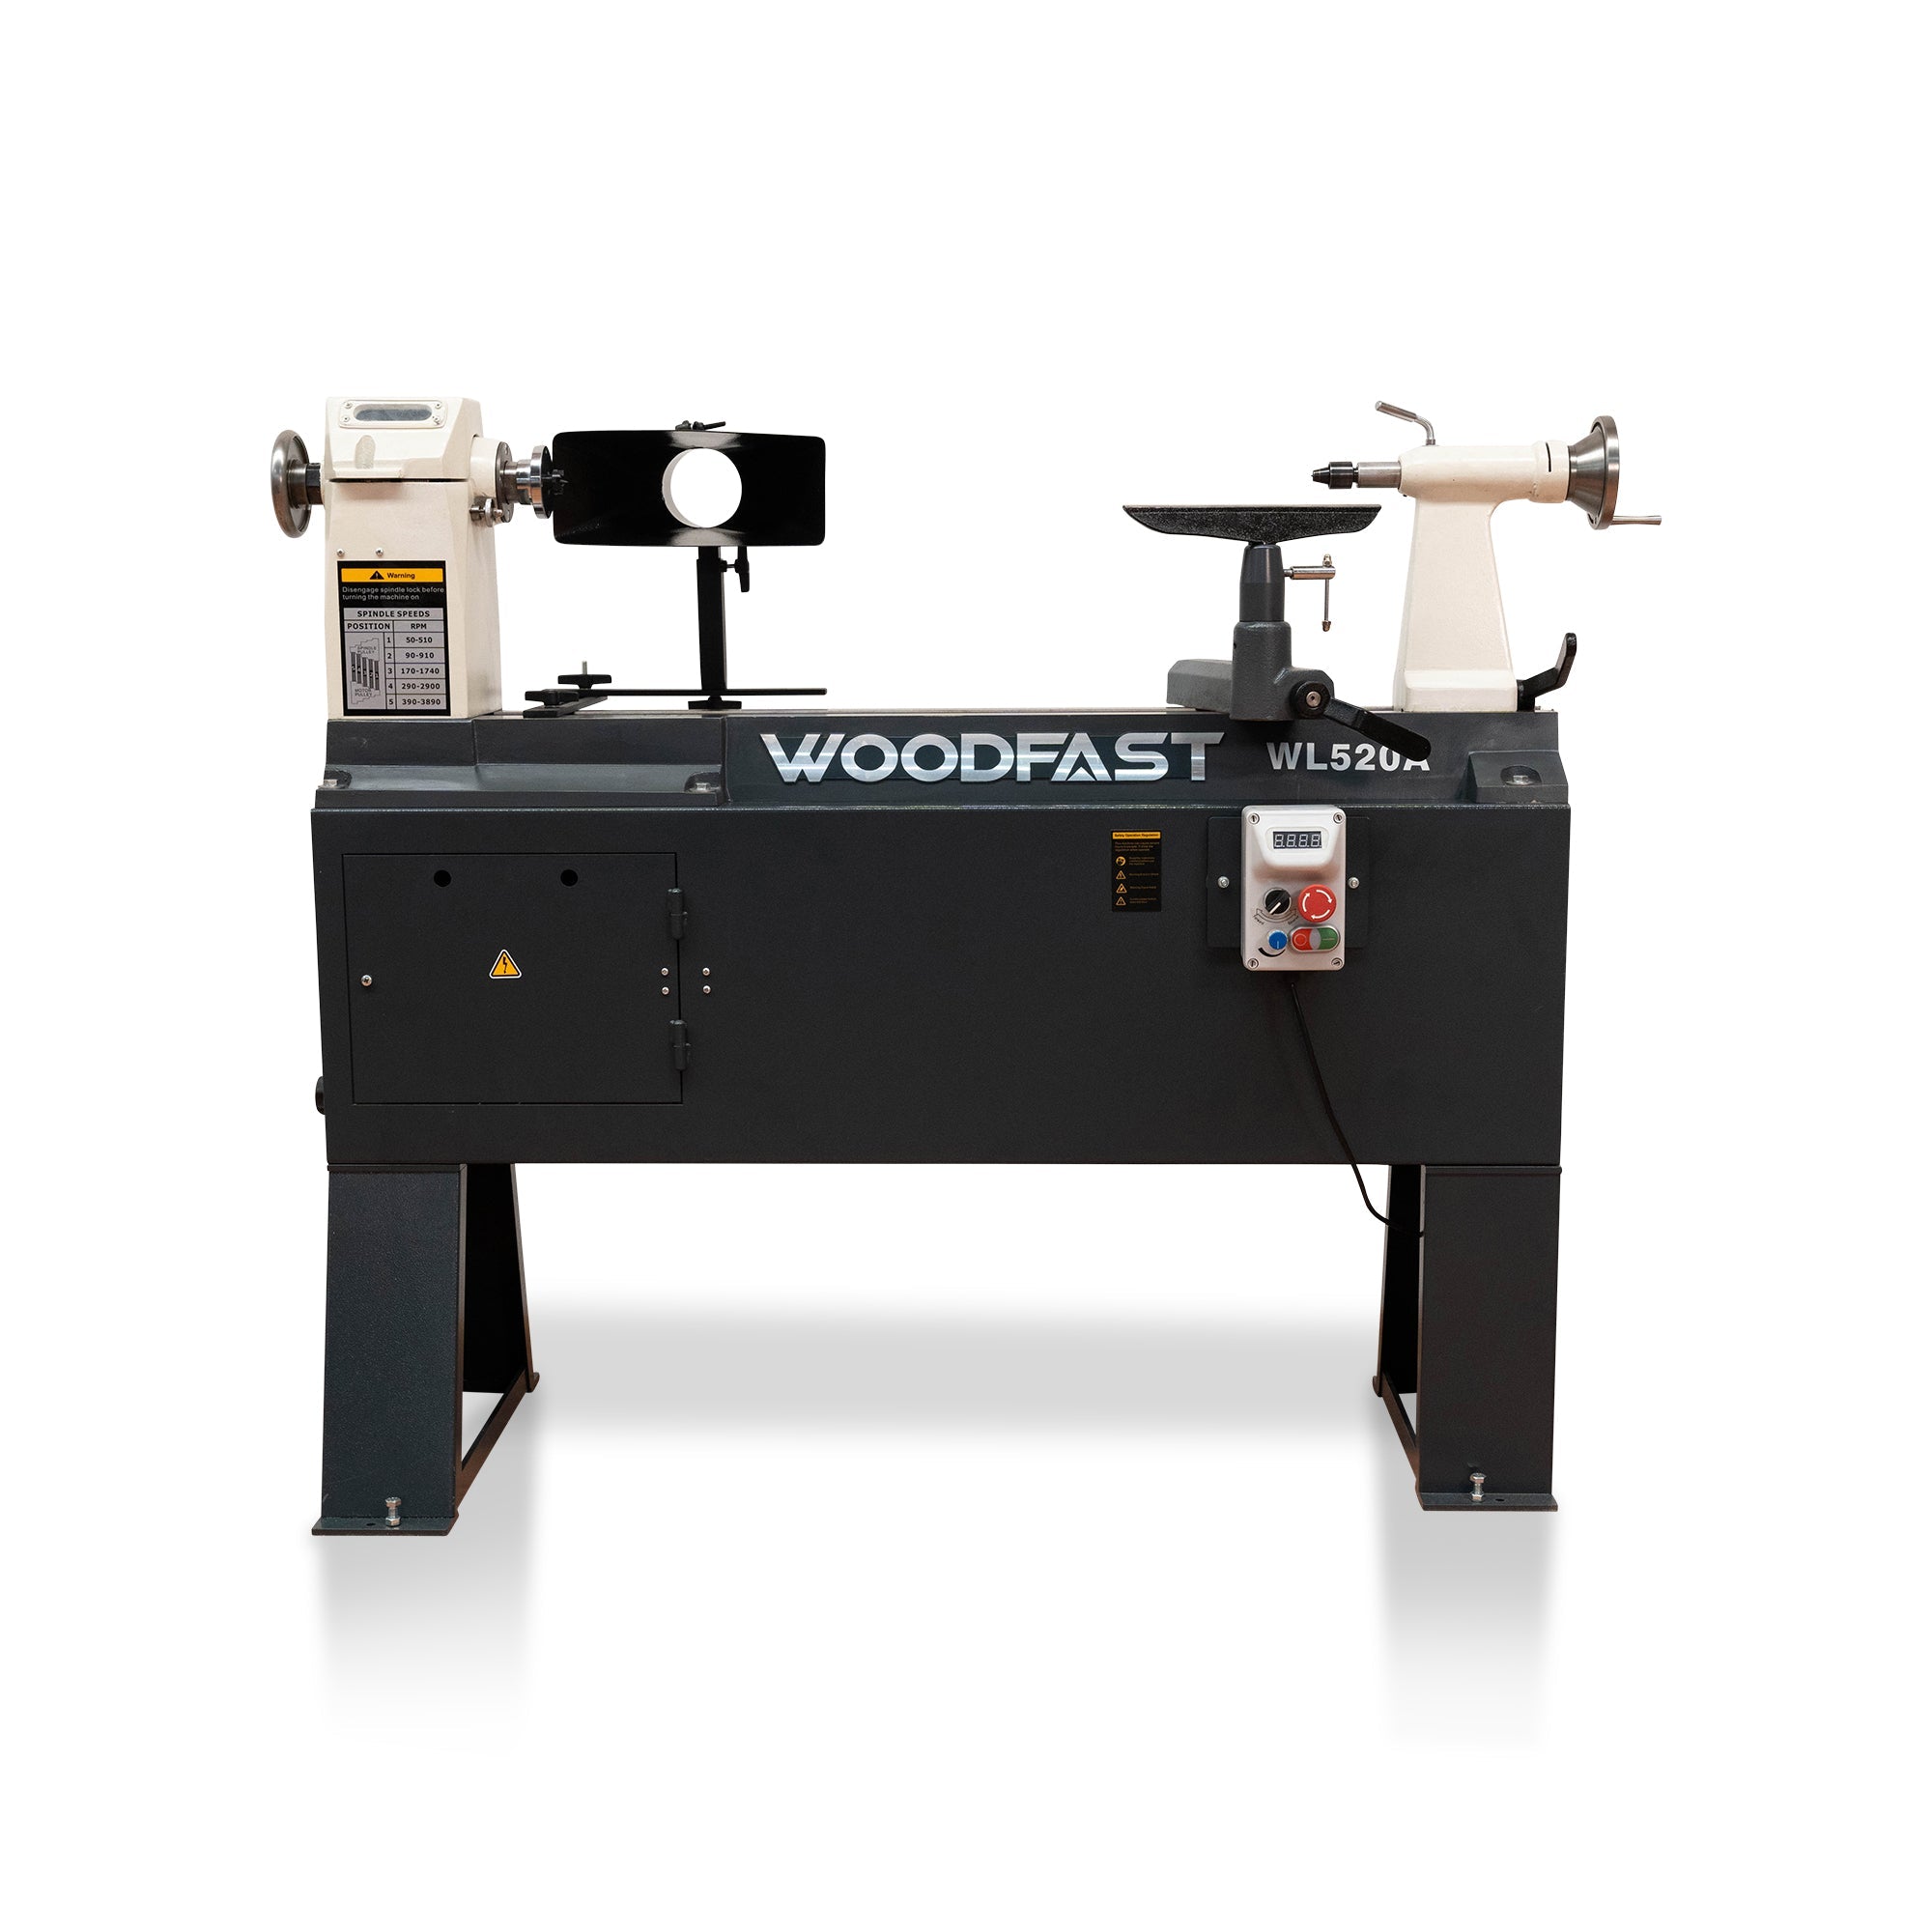 510mm (20") Swing x 915mm (36") Between Centres Heavy Duty Wood Lathe WL520A by Woodfast